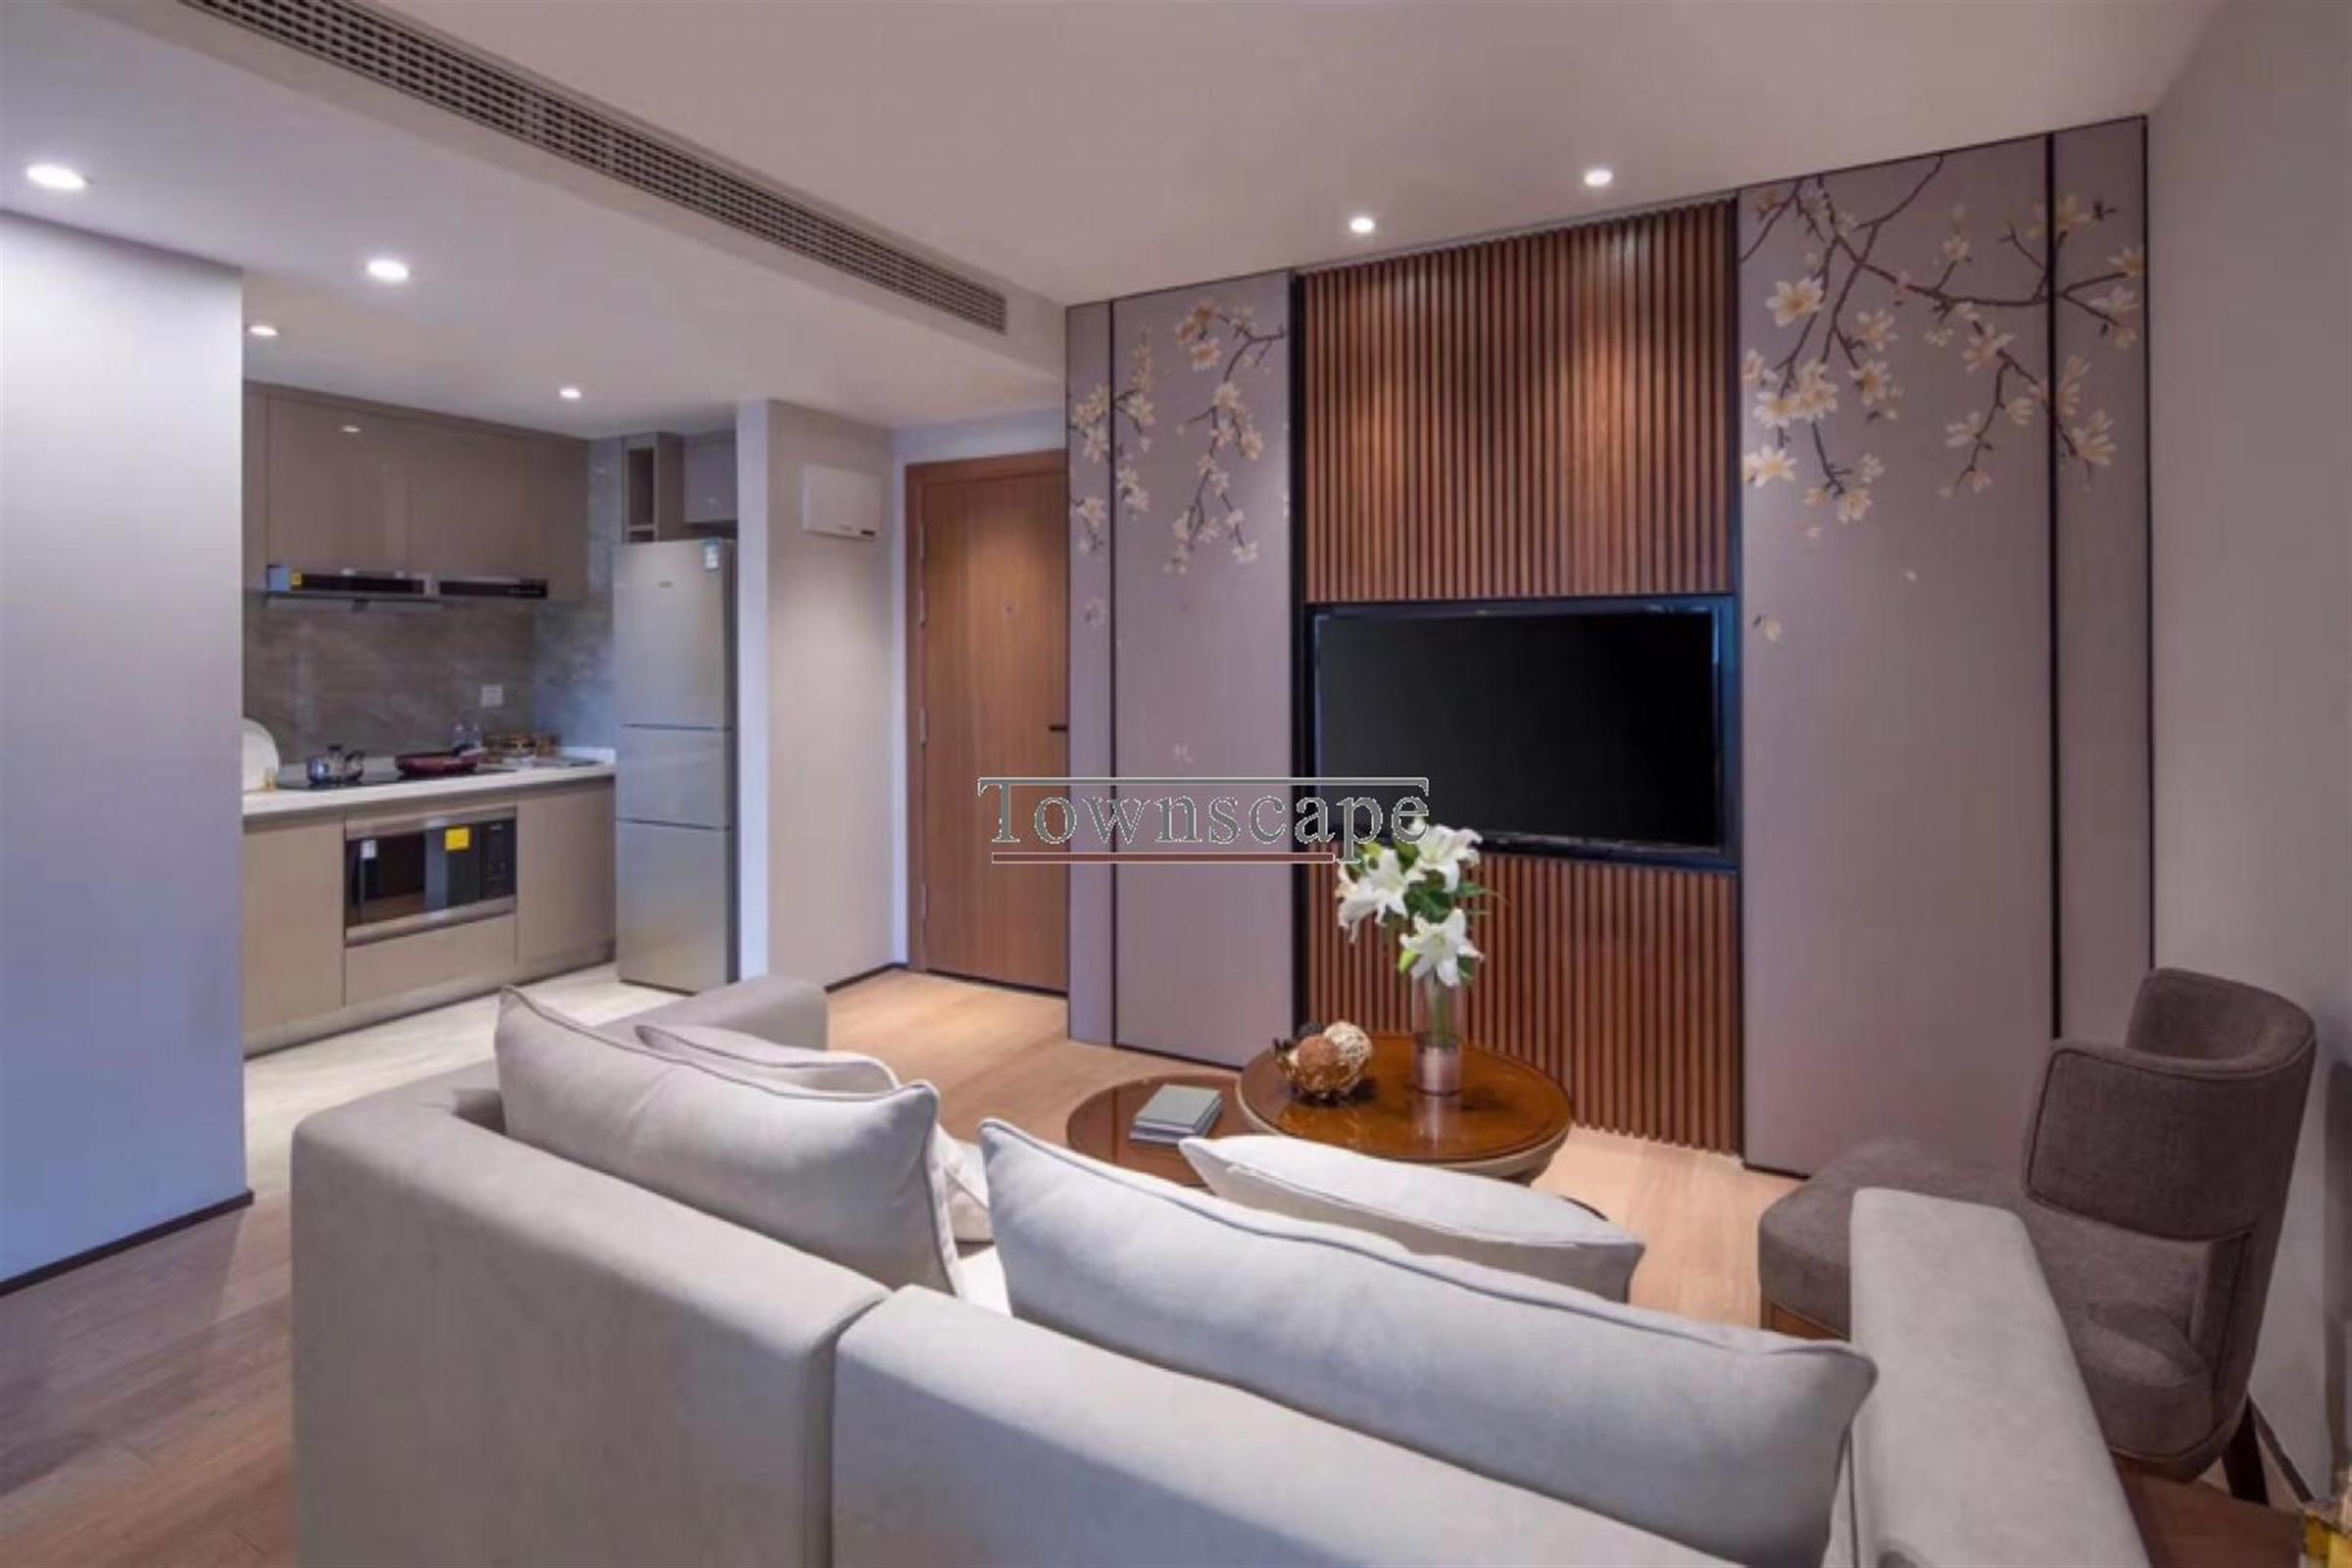 classy decor Beautifully Decorated, Newly Opened Studio Service Apartments in Jing